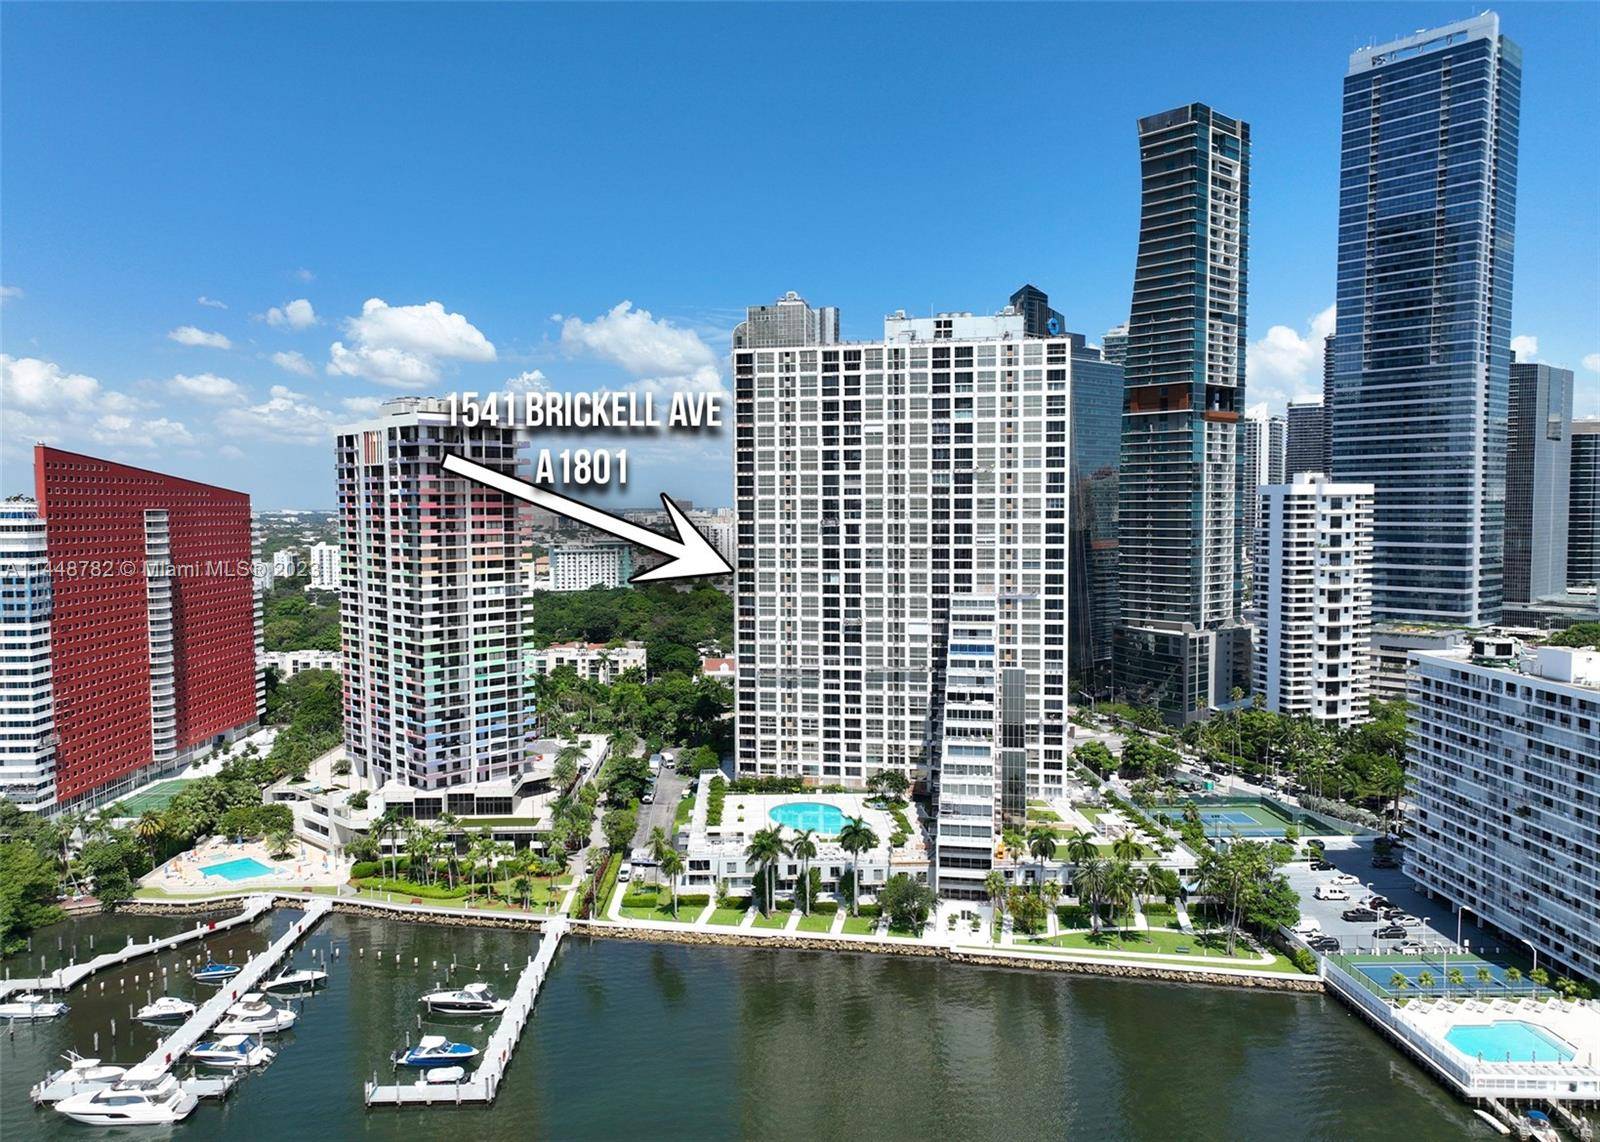 Discover luxury living in this bright spacious 2 bedroom 2 bathroom den unit nestled in the heart of Brickell.